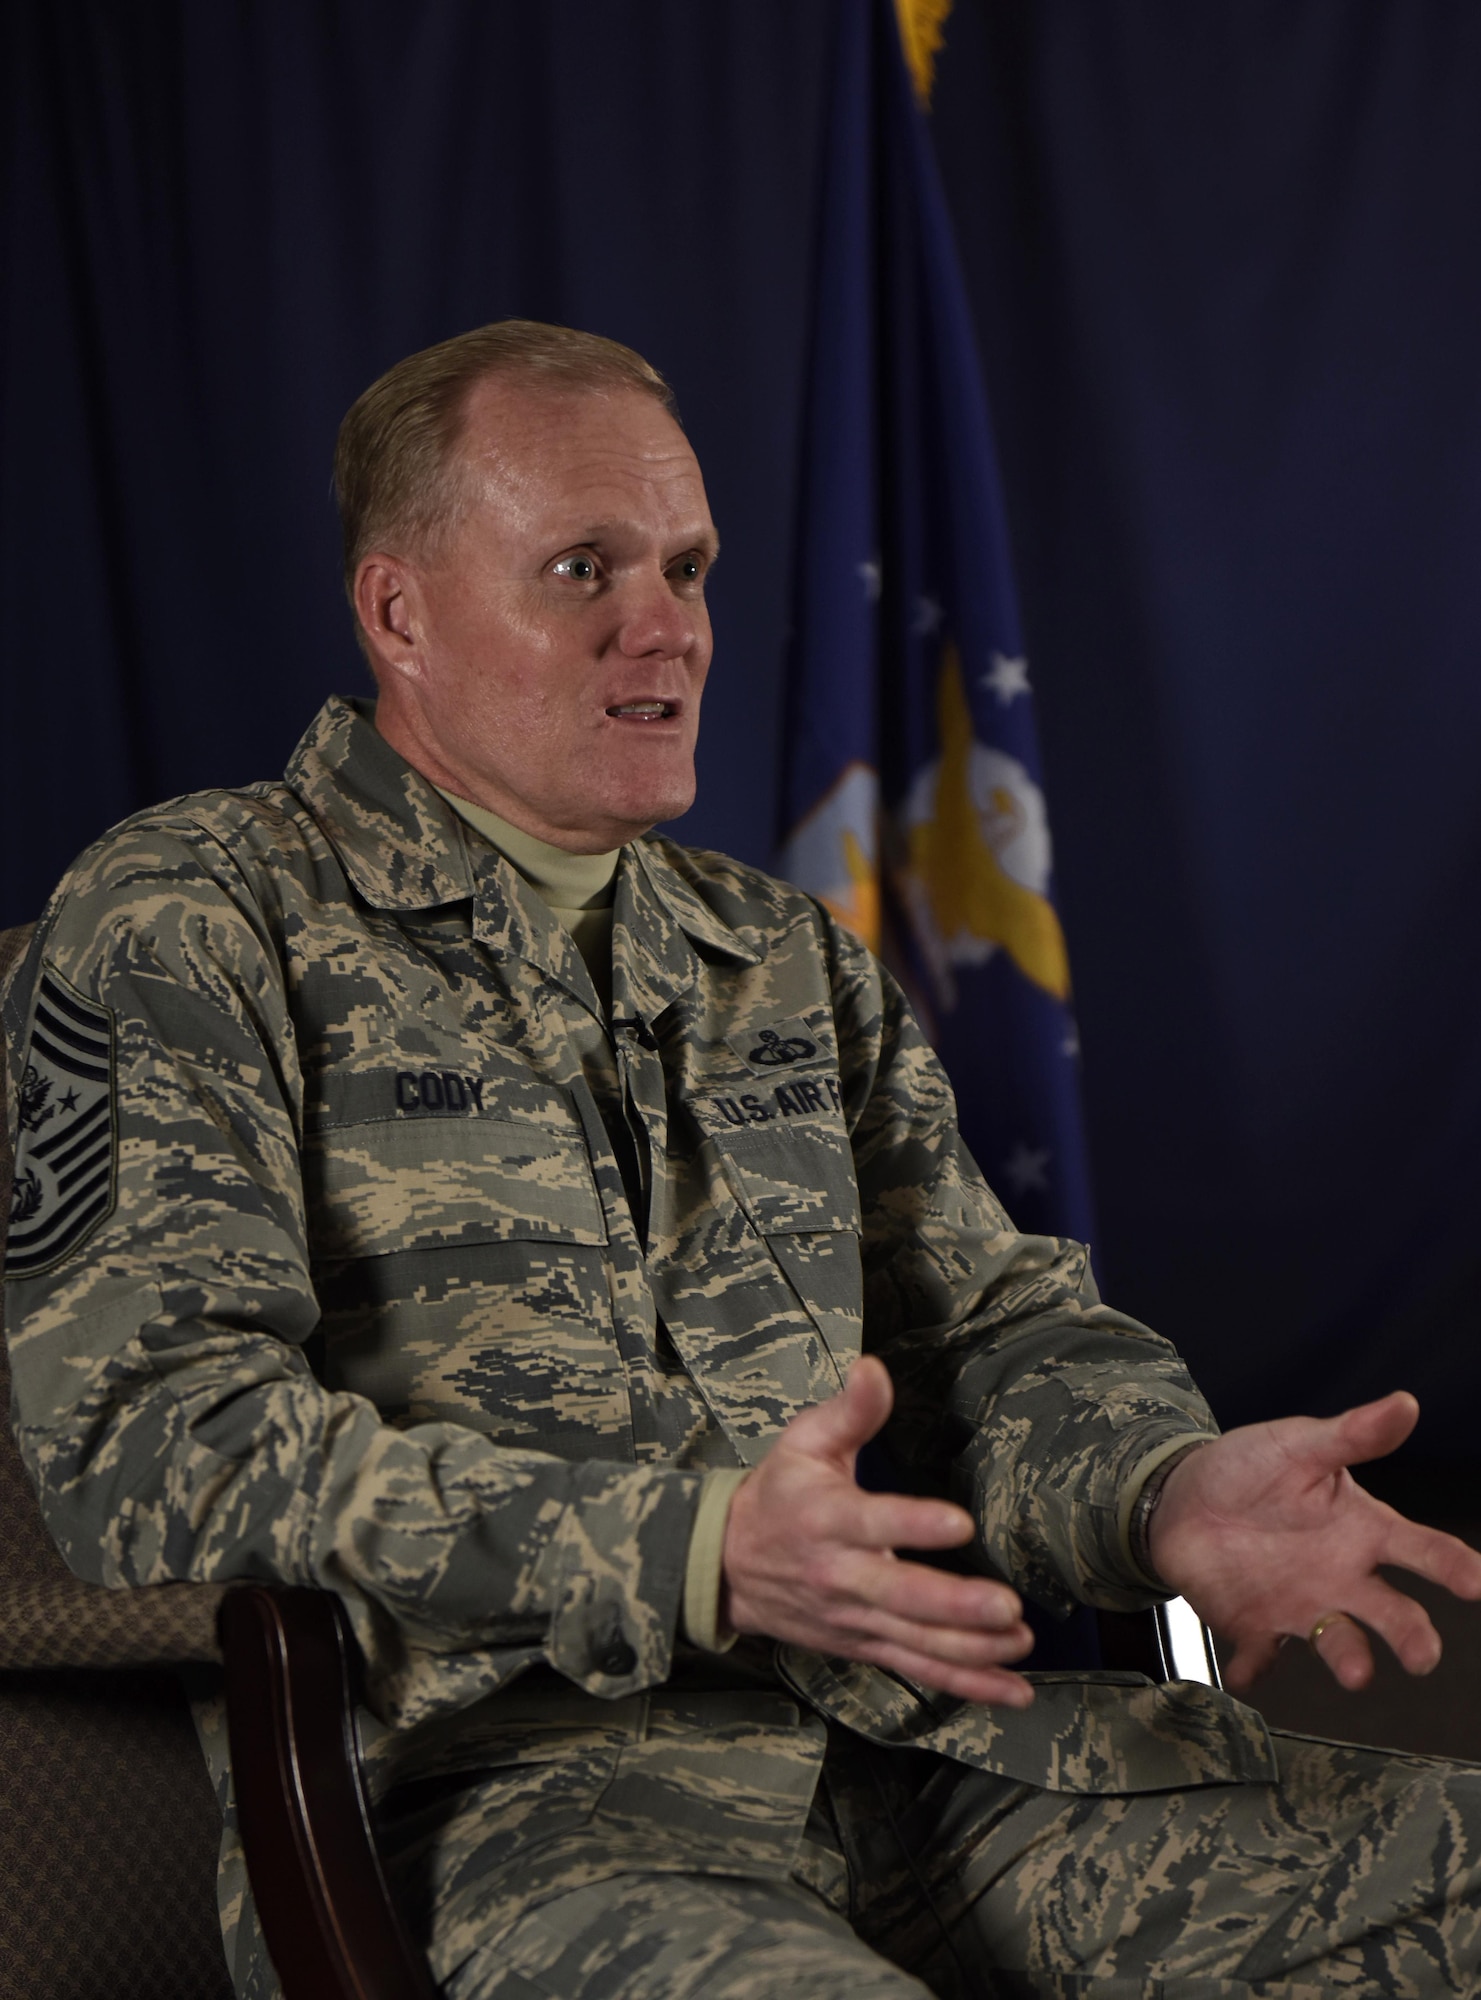 Chief Master Sgt. of the Air Force James Cody discusses Air Mobility Command's contributions to the Air Force mission and the need to modernize the fleet during his visit to Scott Air Force Base, Ill, Jan. 18, 2017. The purpose of his visit was to address new chief master sergeants and chief master sergeant-selects during the annual AMC Chief's Leadership Course. (U.S. Air Force photo by Staff Sgt. Stephenie Wade)
